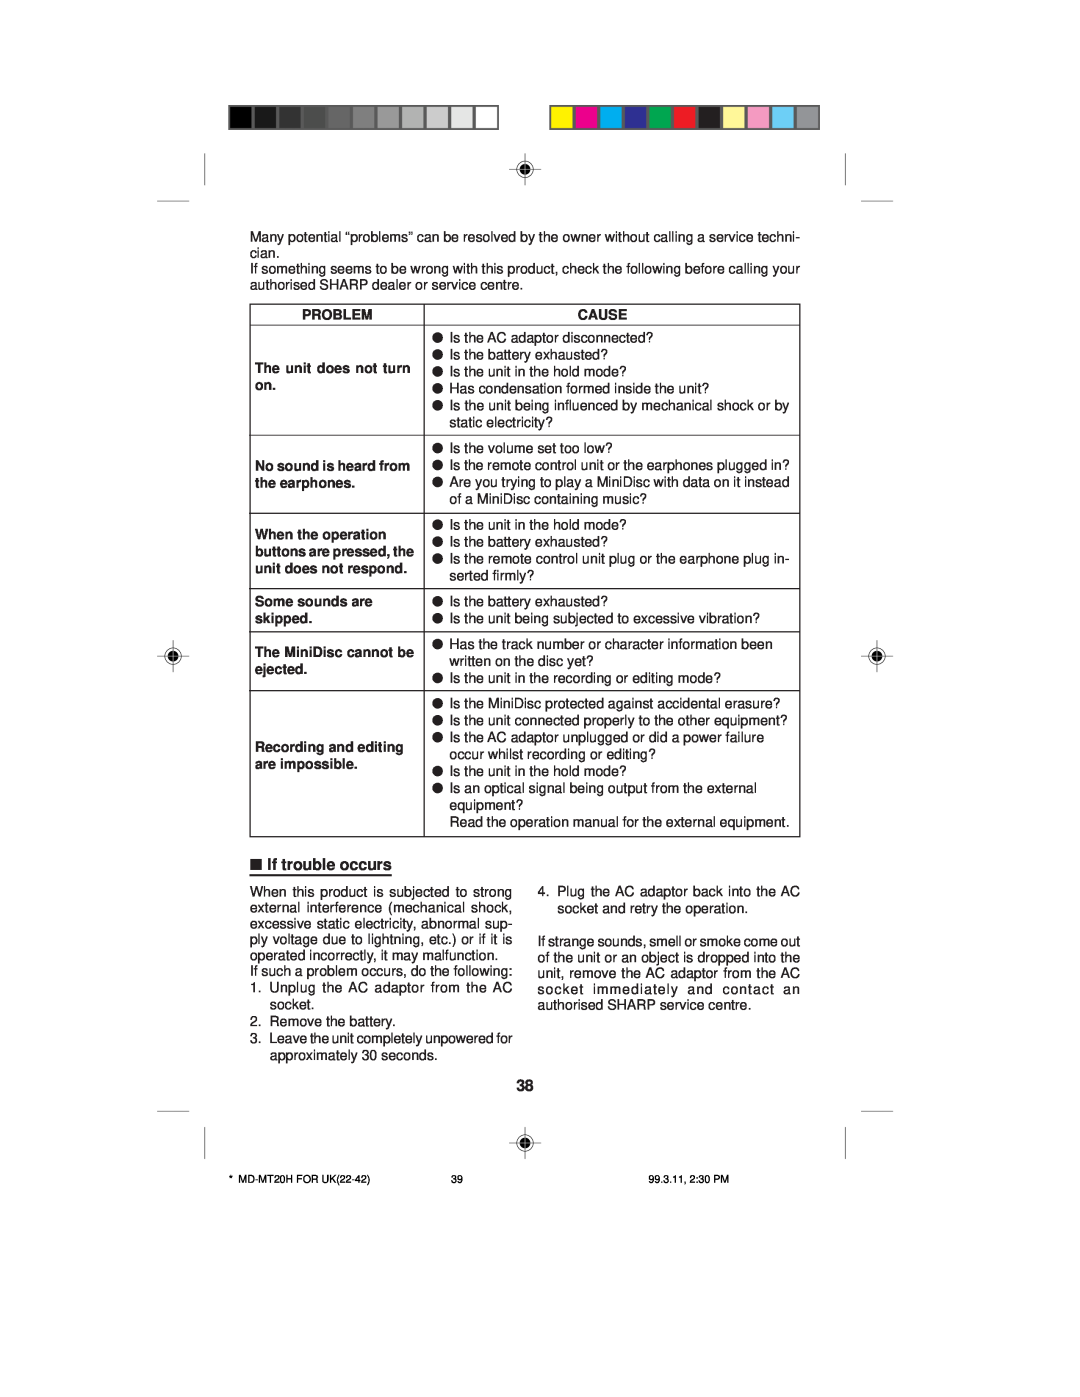 Sharp MD-MT20H operation manual If trouble occurs 